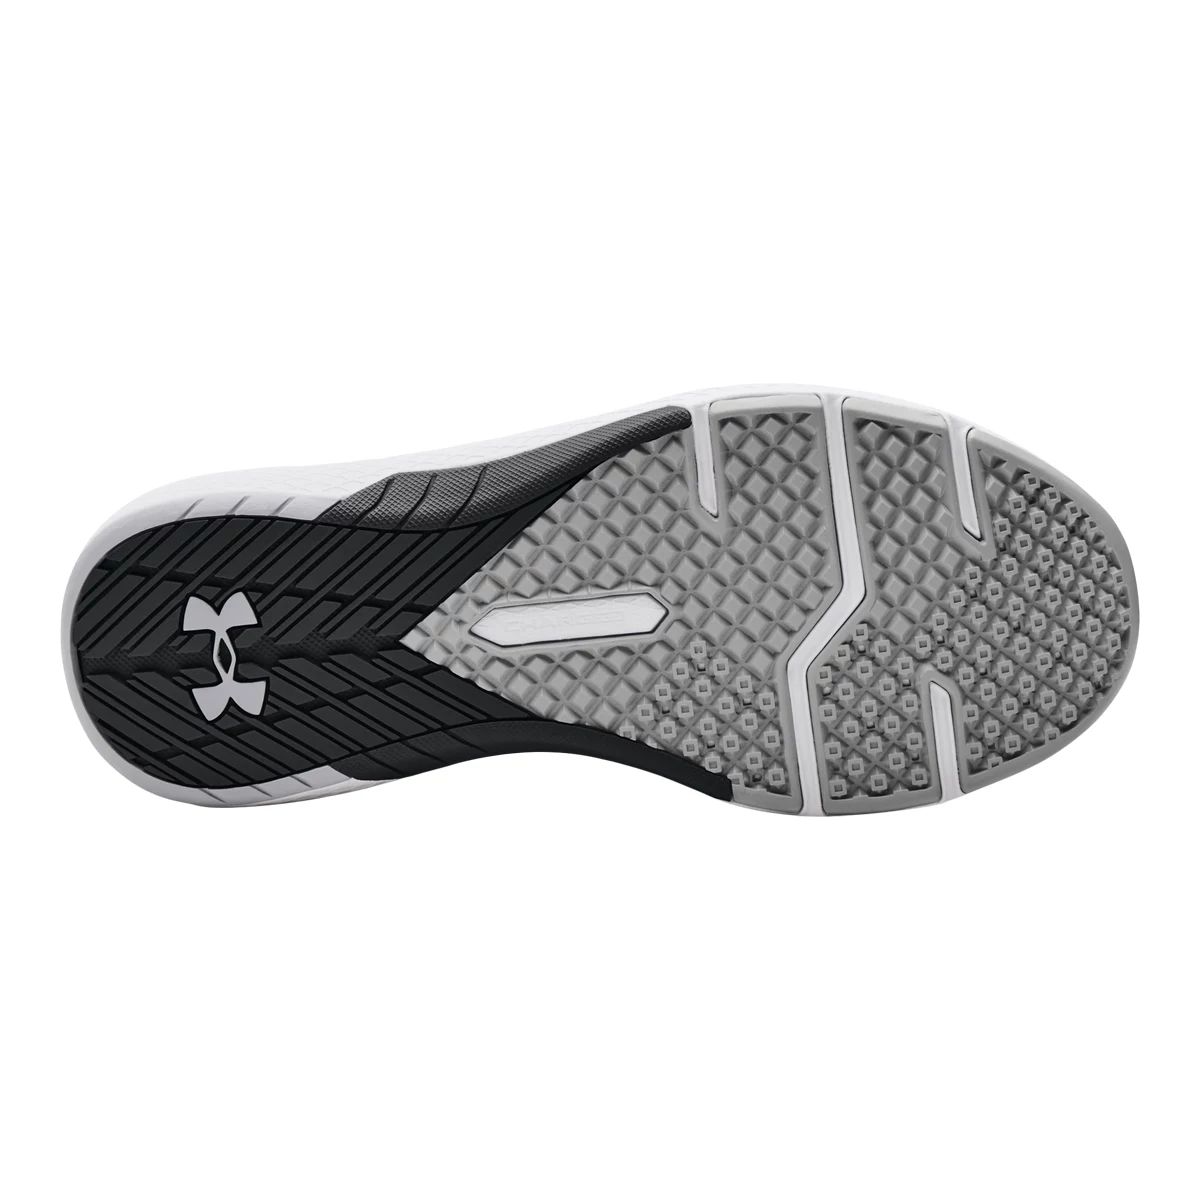 Under Armour Men's Commit 3.0 Training Shoes, 4E Extra Wide Width, Gym ...